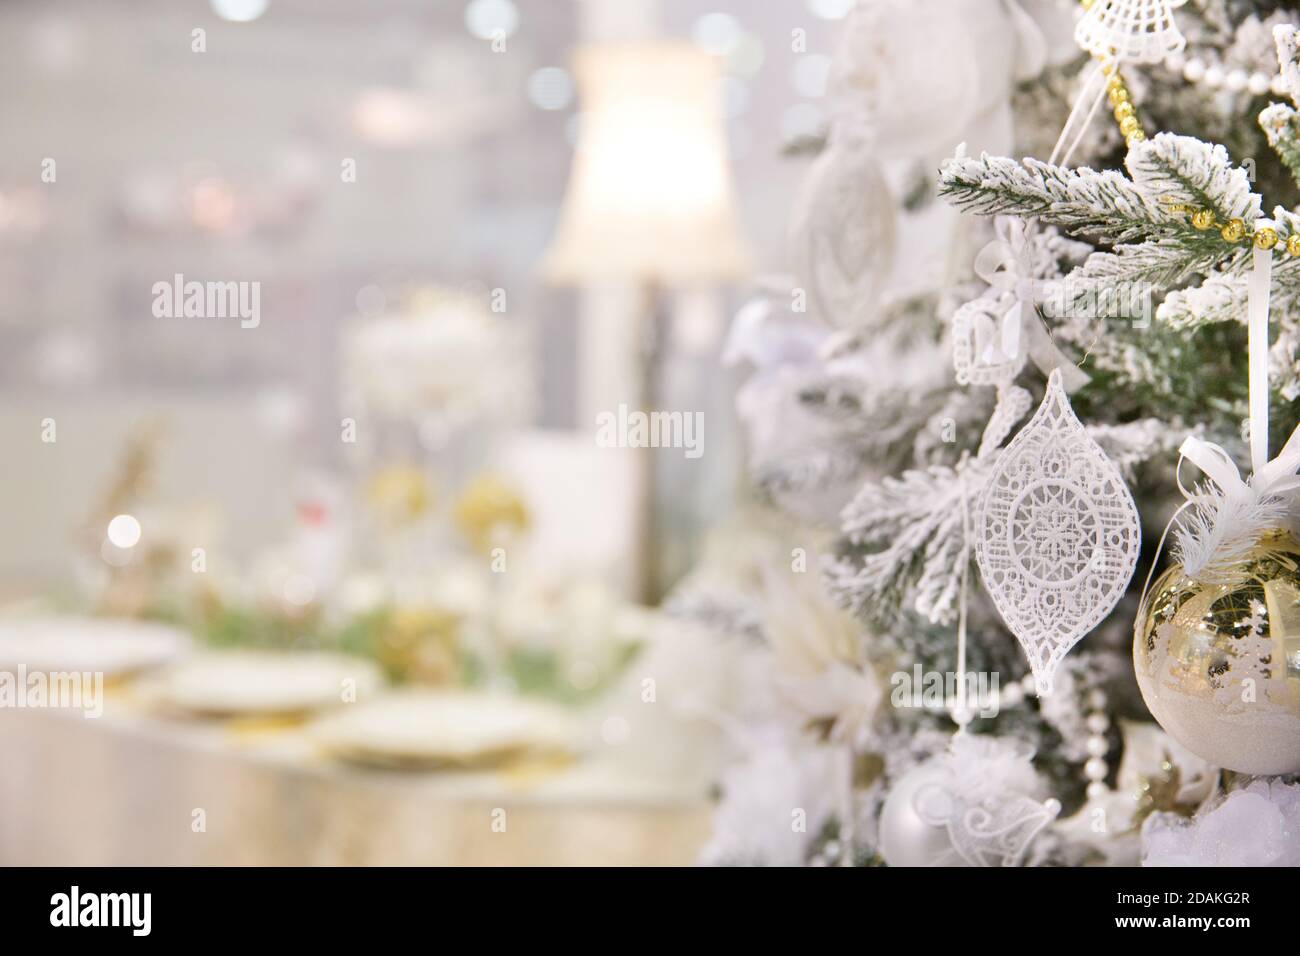 Christmas or New Year card. New Year's decor in white colors. Christmas decorations on the fir. Stock Photo